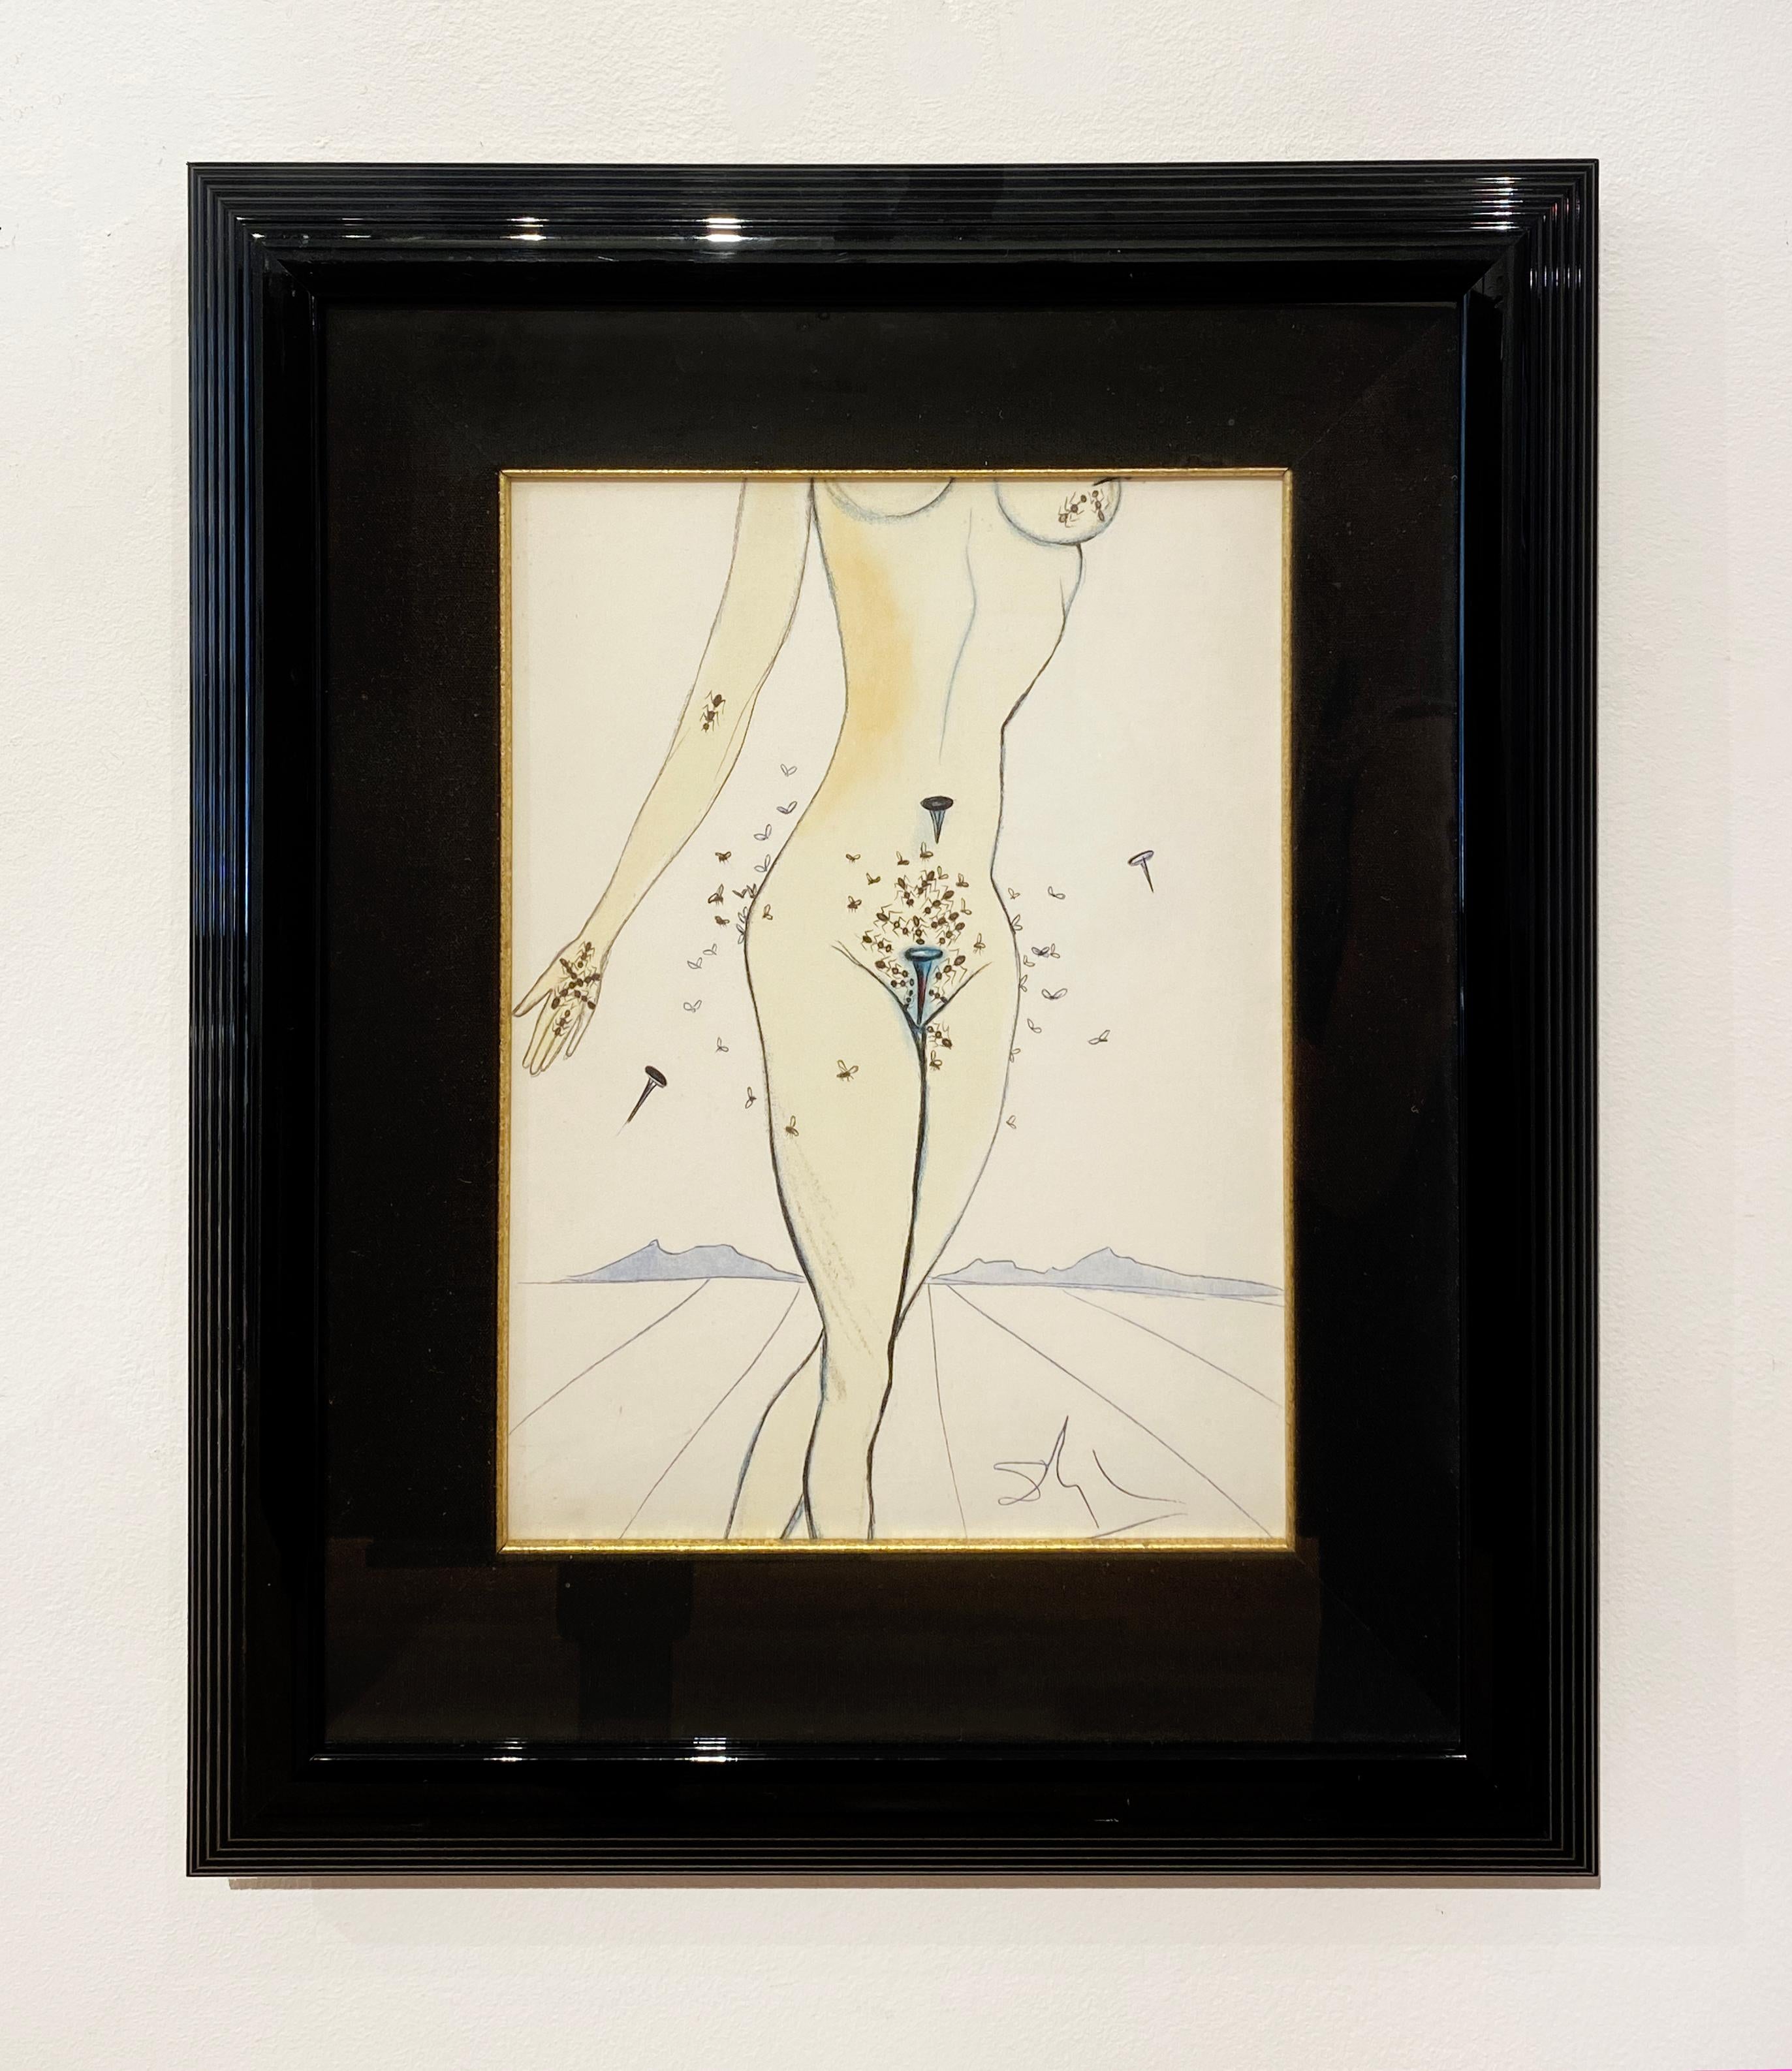 Ants, Snails, and Flies on Nude - Surrealist Print by Salvador Dalí